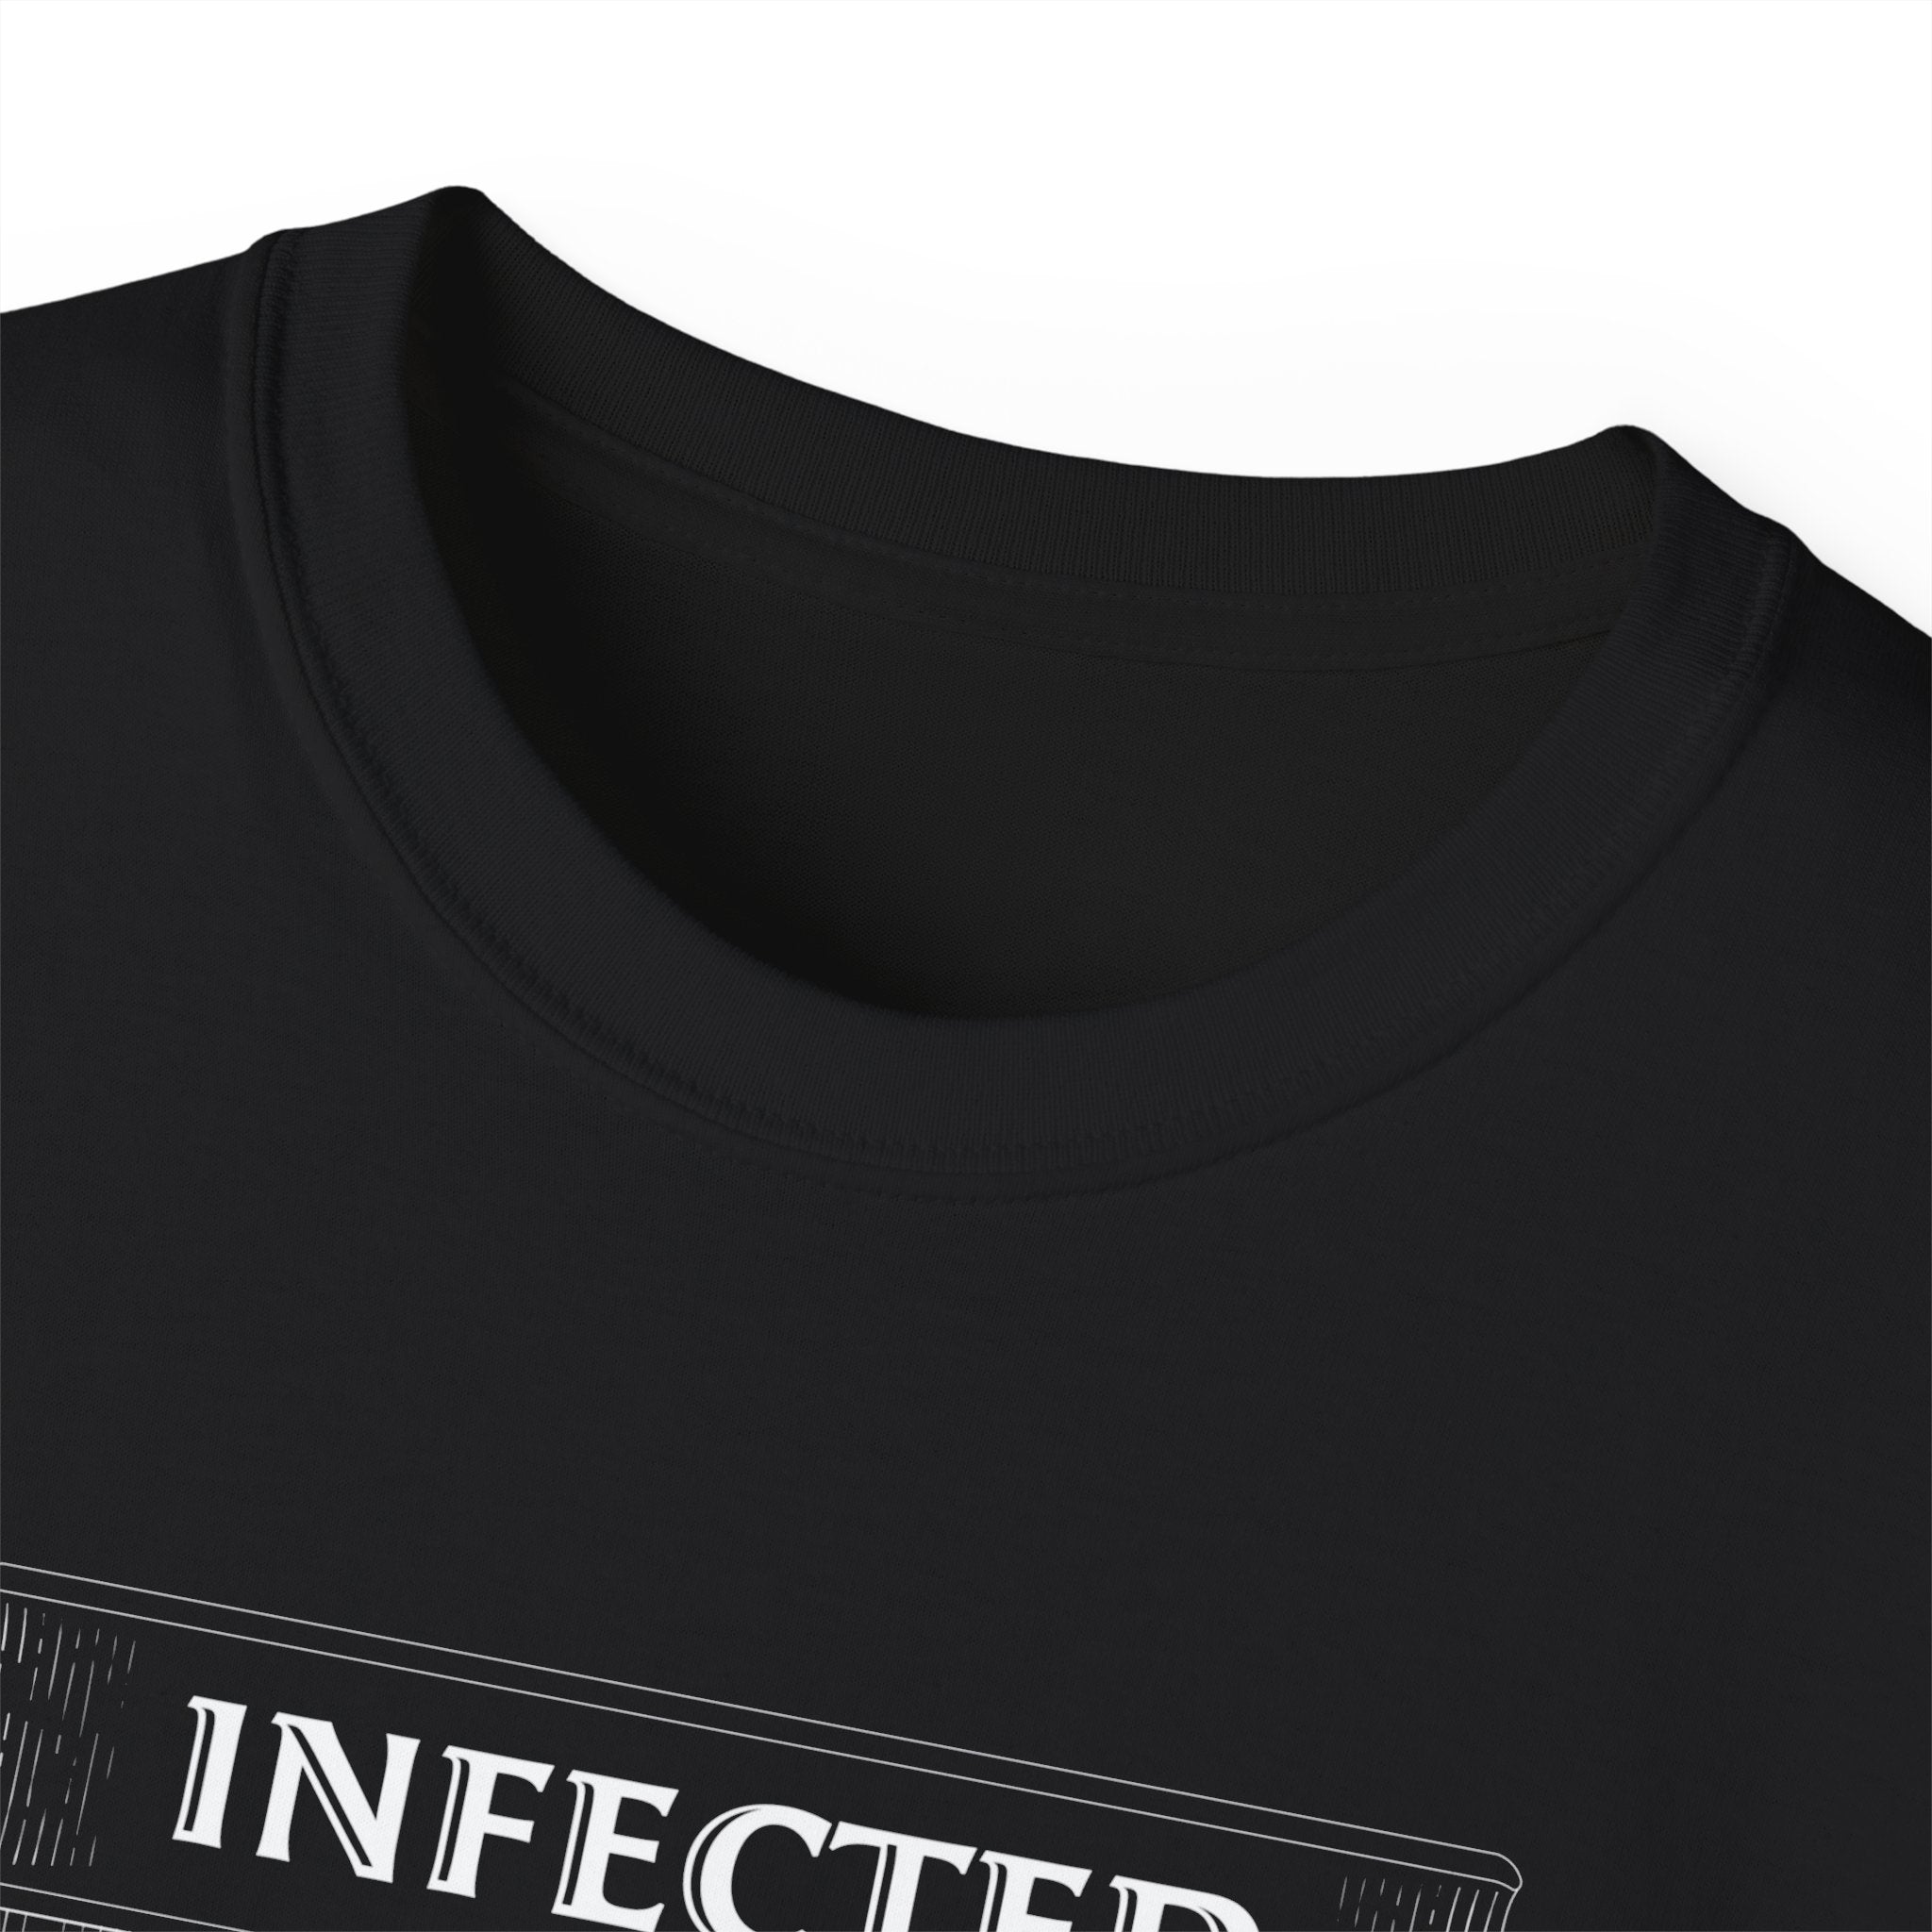 Infected With That Gold Fever T-Shirt